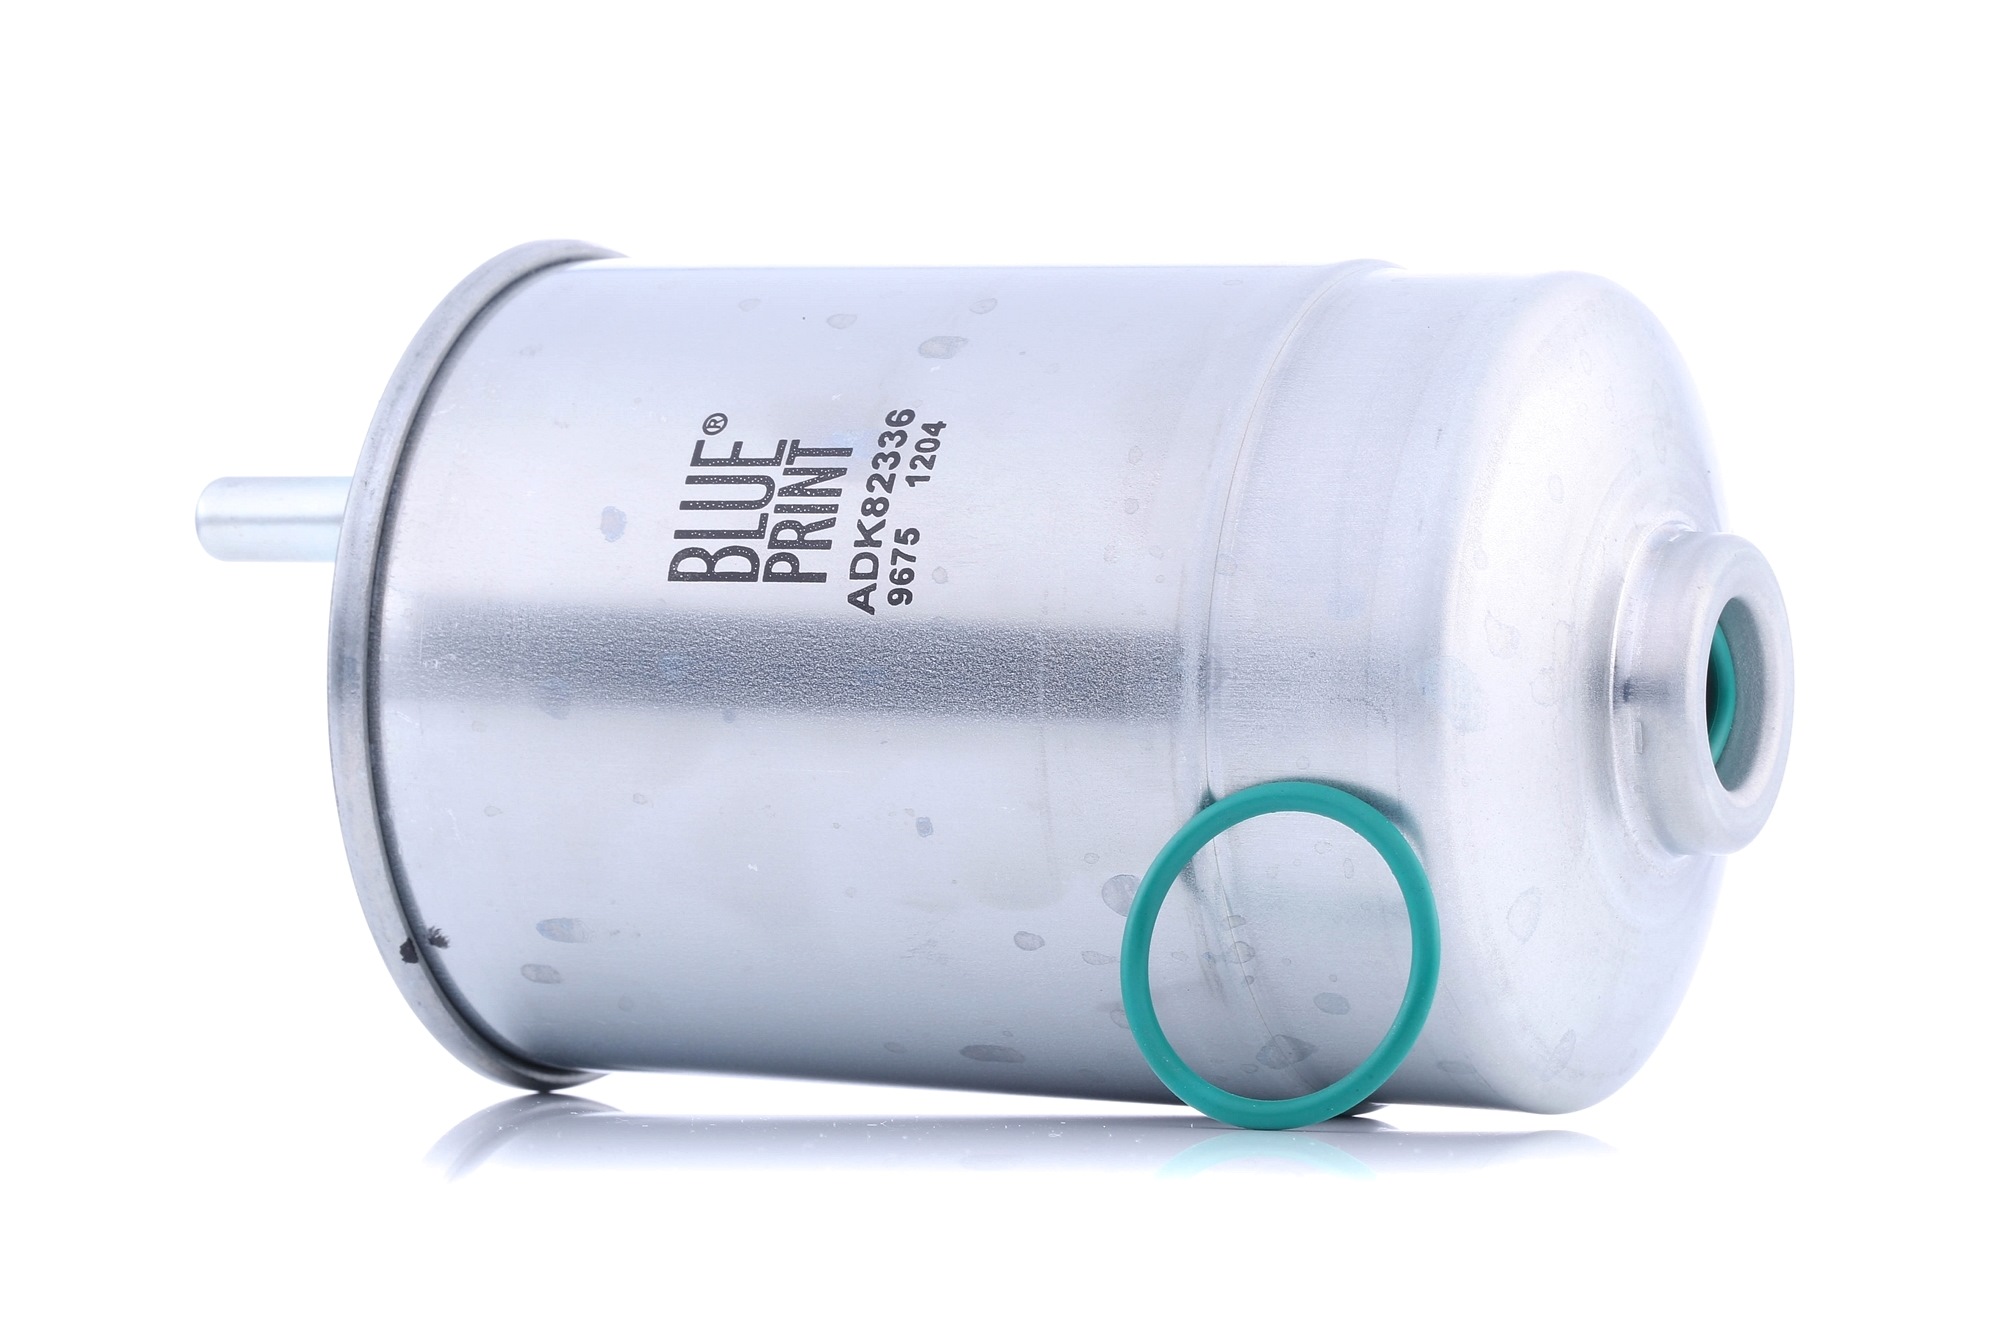 BLUE PRINT ADK82336 Fuel filter SUZUKI experience and price